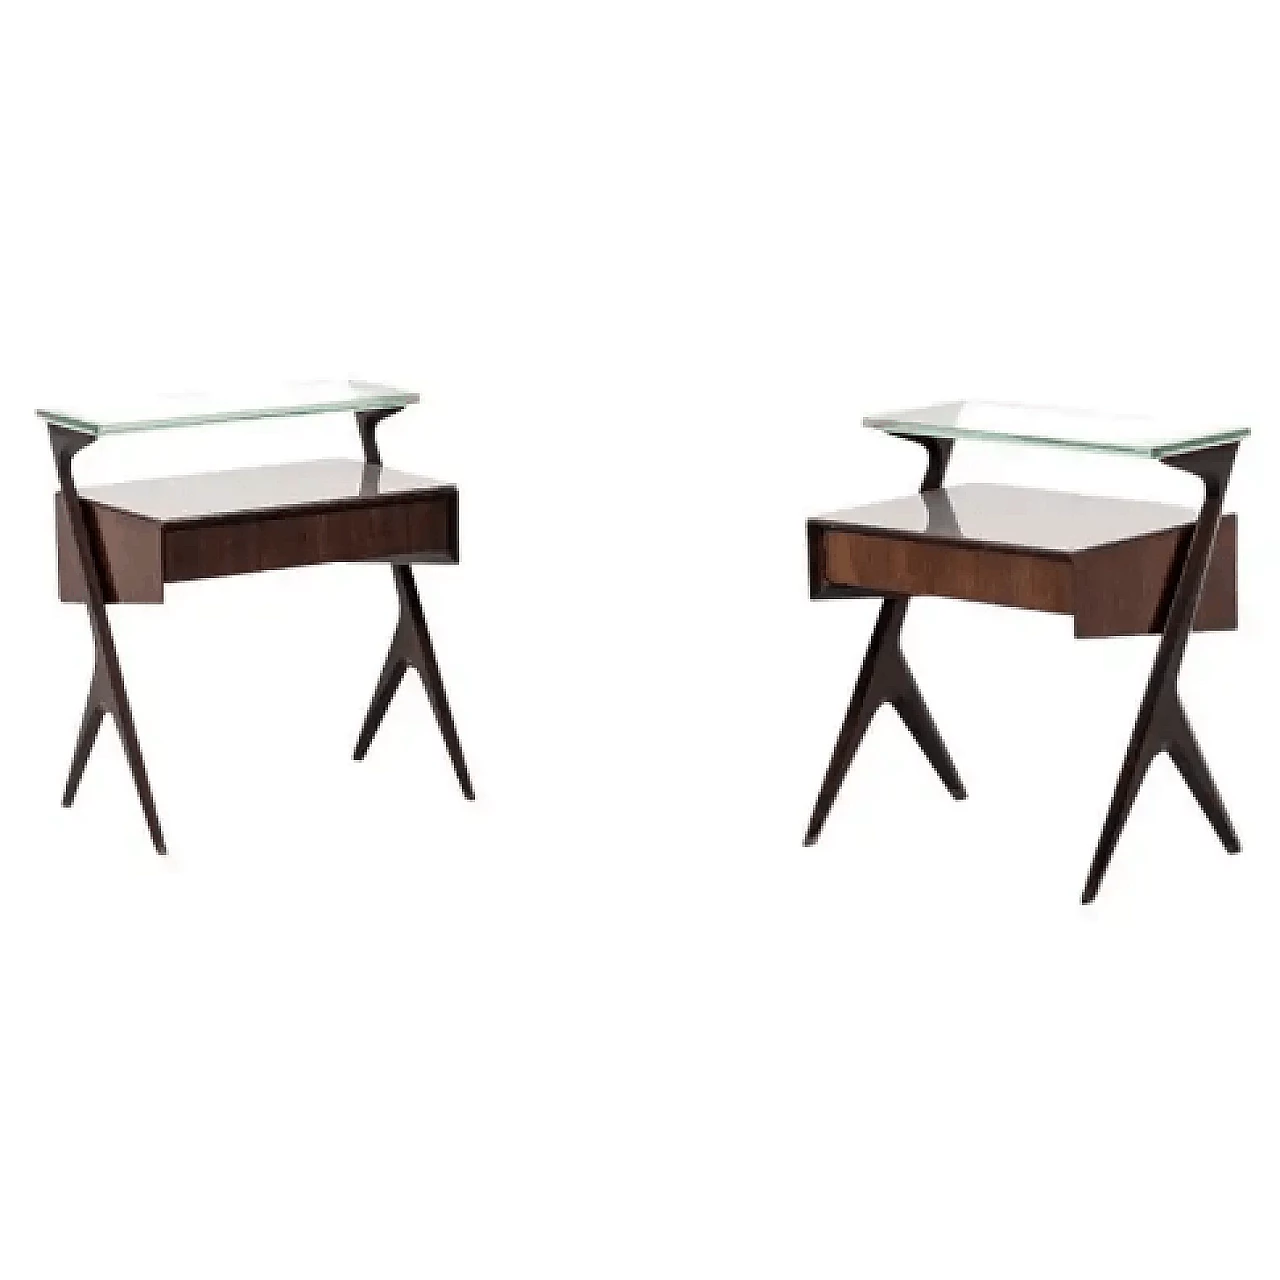 Pair of bedside tables attributed to Ico Parisi in glass and wood, 1950s 1380761